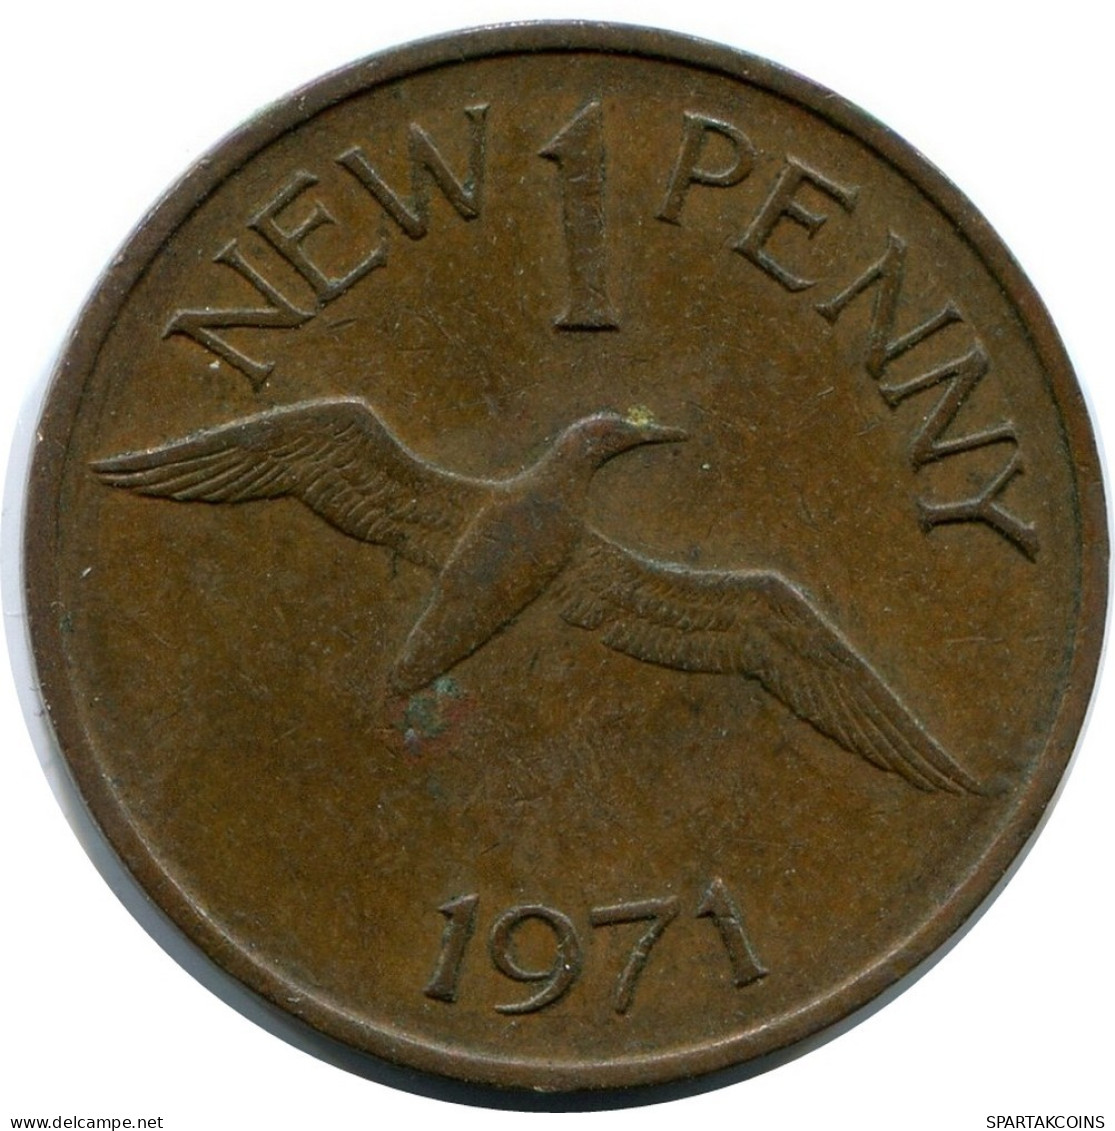 1 NEW PENNY 1971 GUERNSEY Münze #AX903.D.A - Guernesey